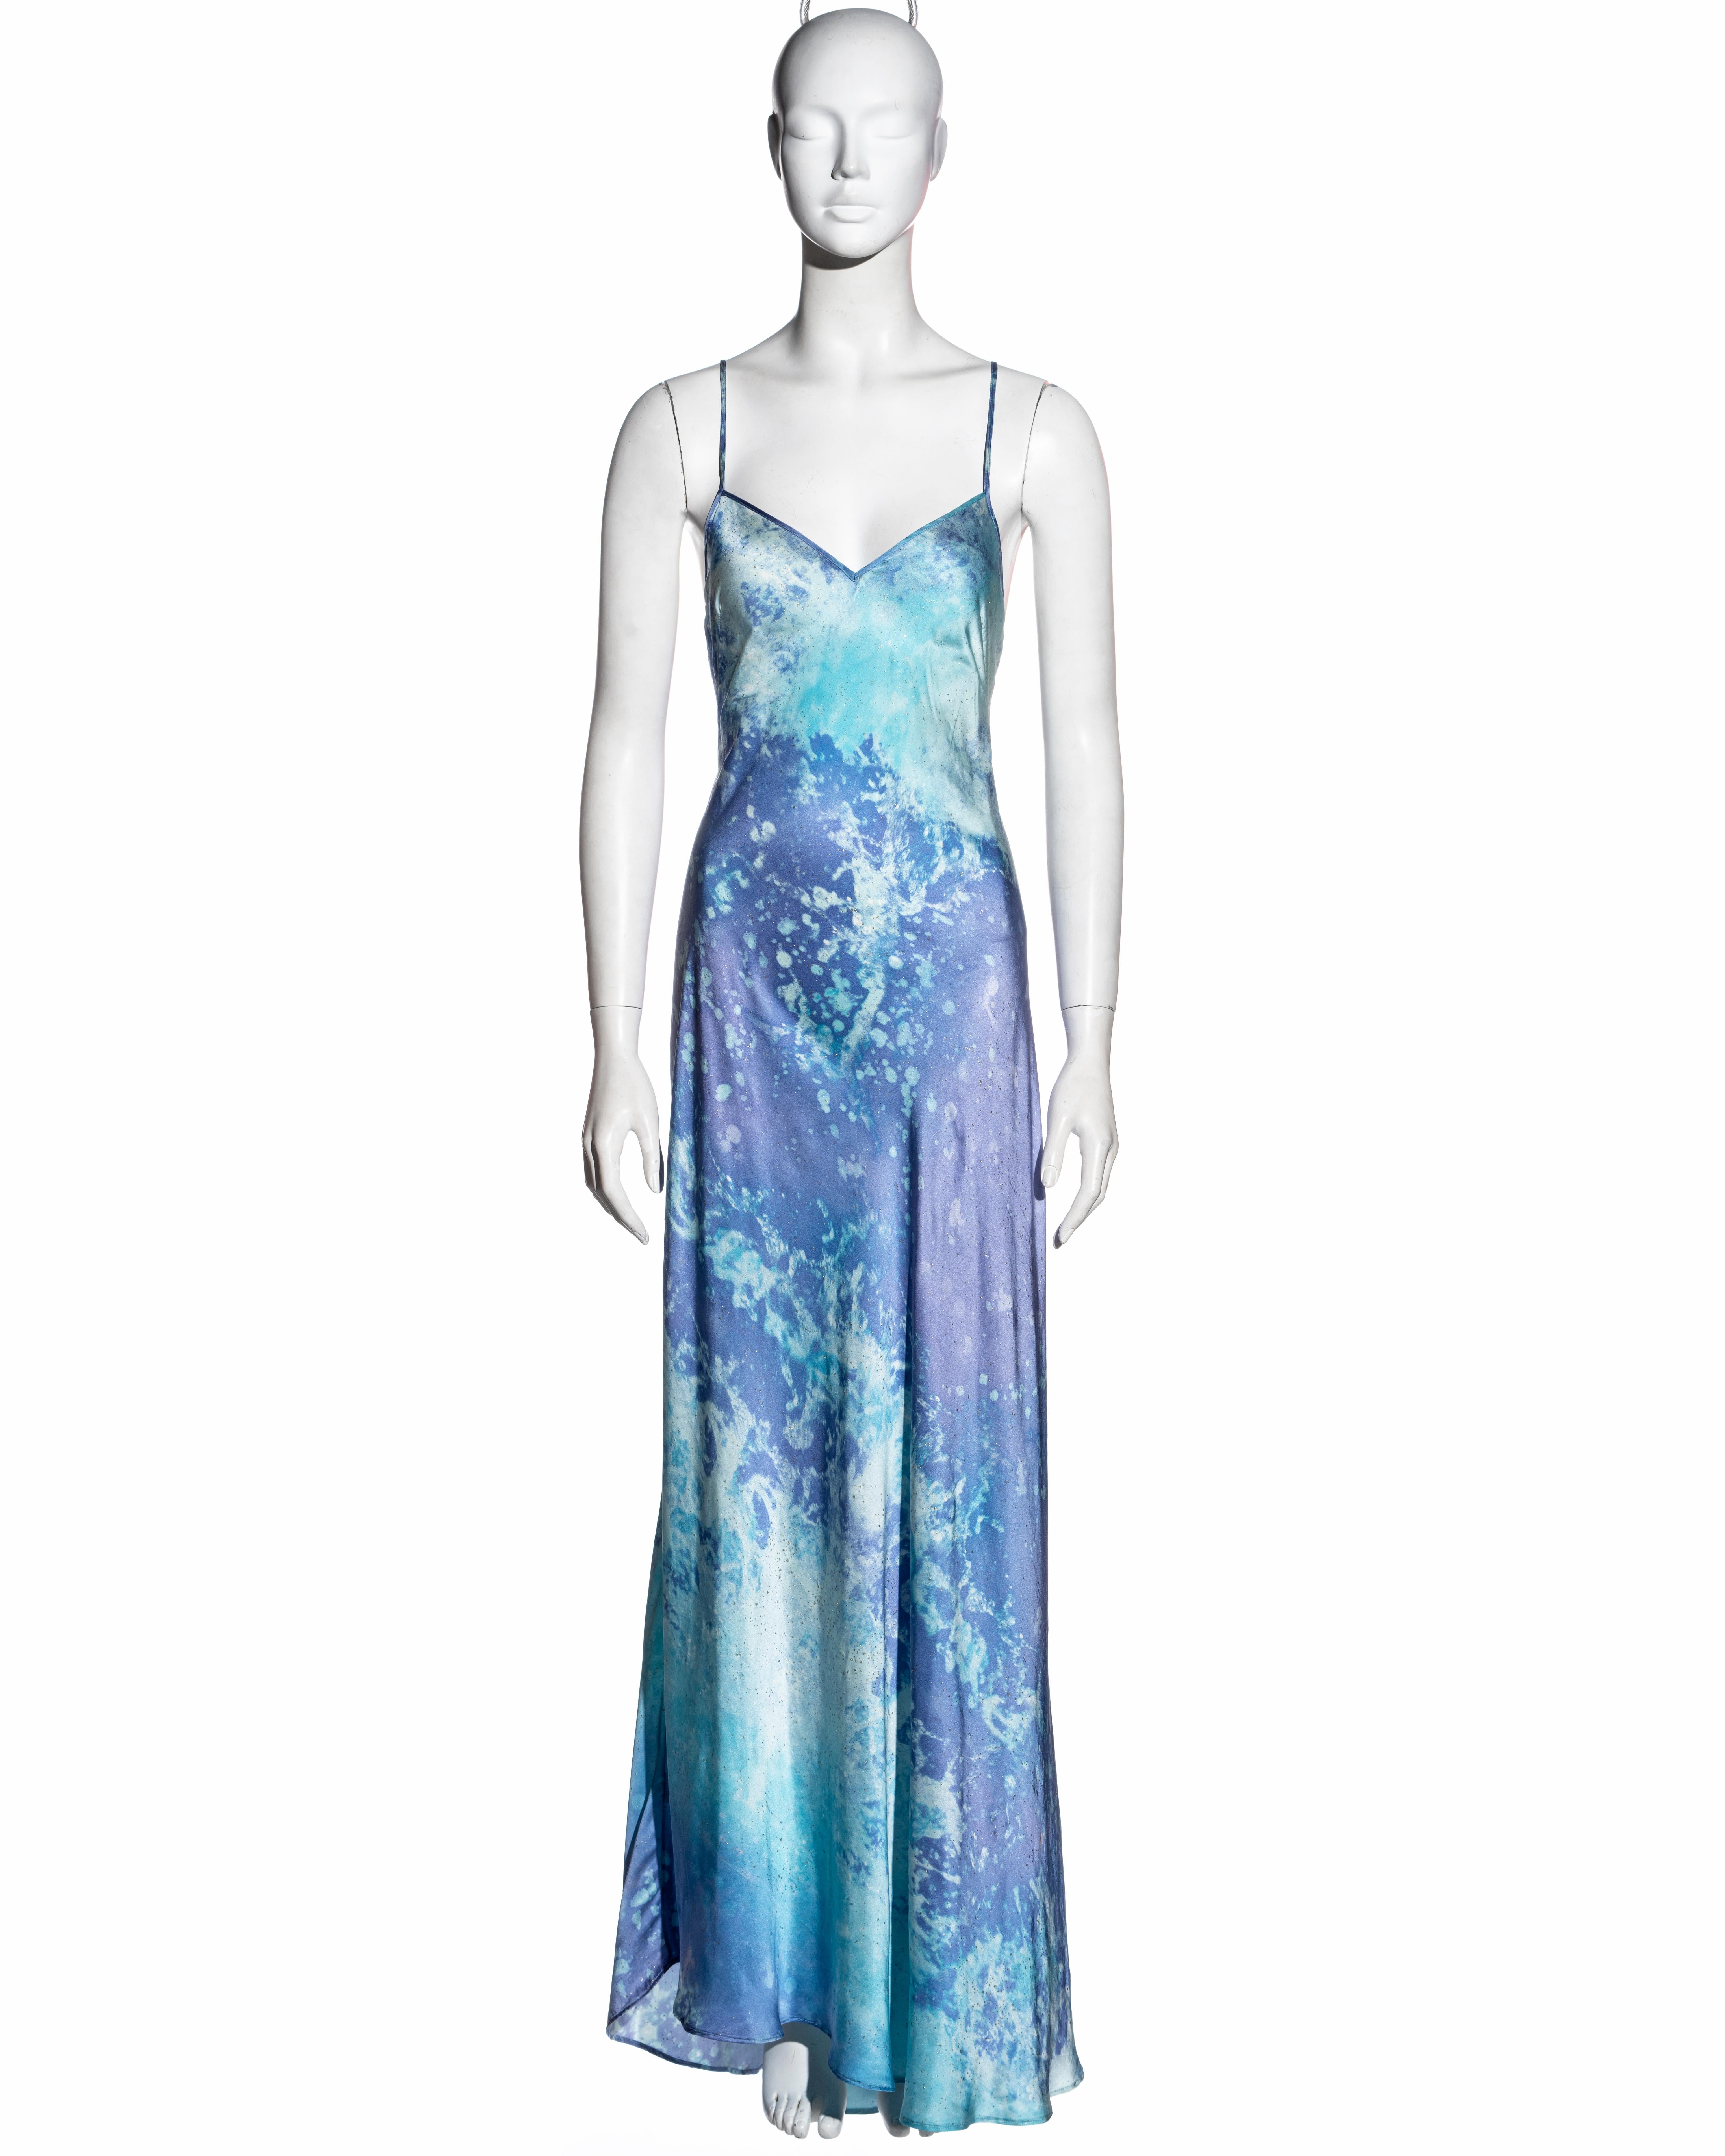 ▪ Roberto Cavalli blue and purple silk maxi dress 
▪ Acid wash print with gold glitter  
▪ Open back with drape
▪ V neck 
▪ Long ties with crystal charms criss-cross at back
▪ Asymmetric hemline
▪ Size Medium 
▪ Spring-Summer 1999 
▪ 100% Silk
▪